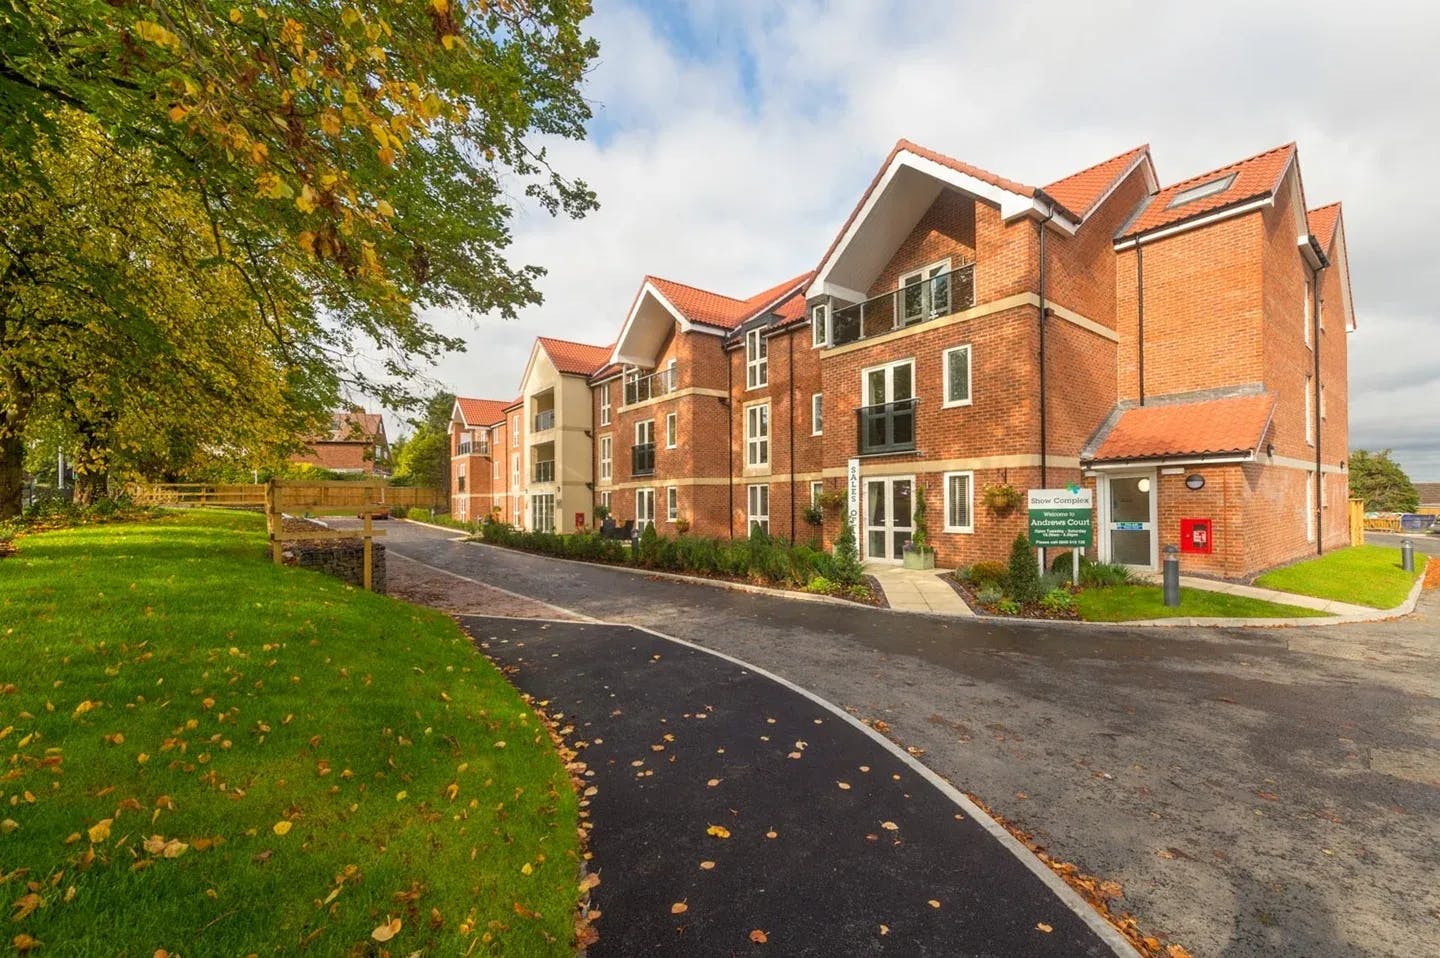 Exterior of Andrews Court Retirement Village  in East Riding of Yorkshire, Yorkshire and Humber